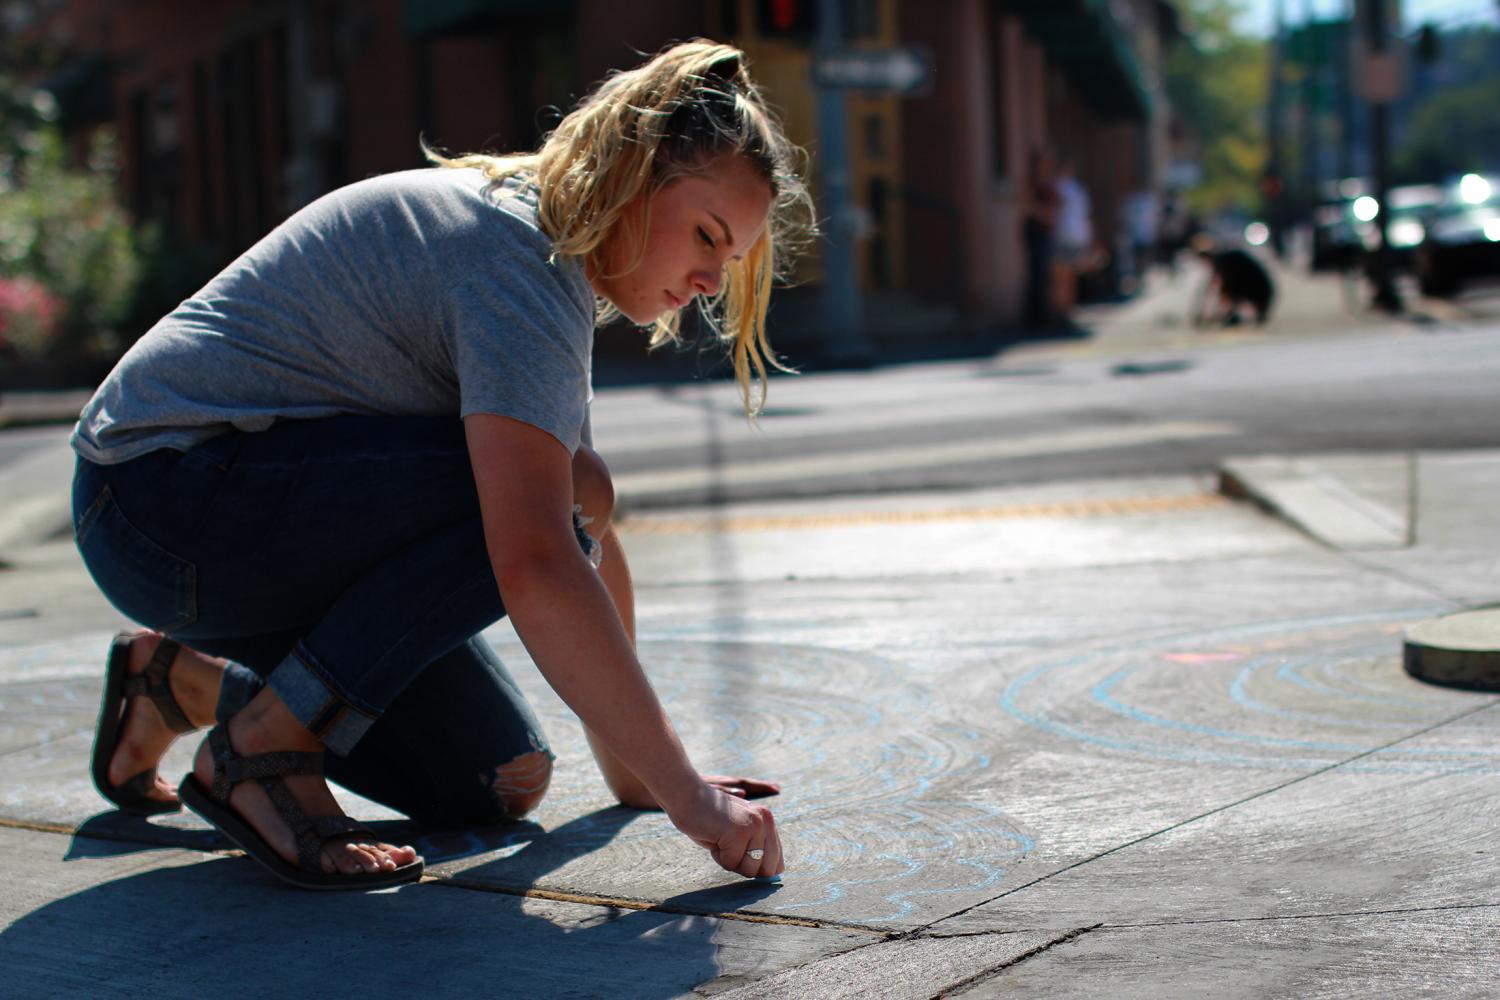 WSU Landscape Architecture student Addy Martoncik draws water designs Thursday afternoon along Grand Avenue.  The students made a chalk illustration to raise awareness of the river many Pullman 
residents are unaware of as part of the Landscape achitecture sophmore studio.  